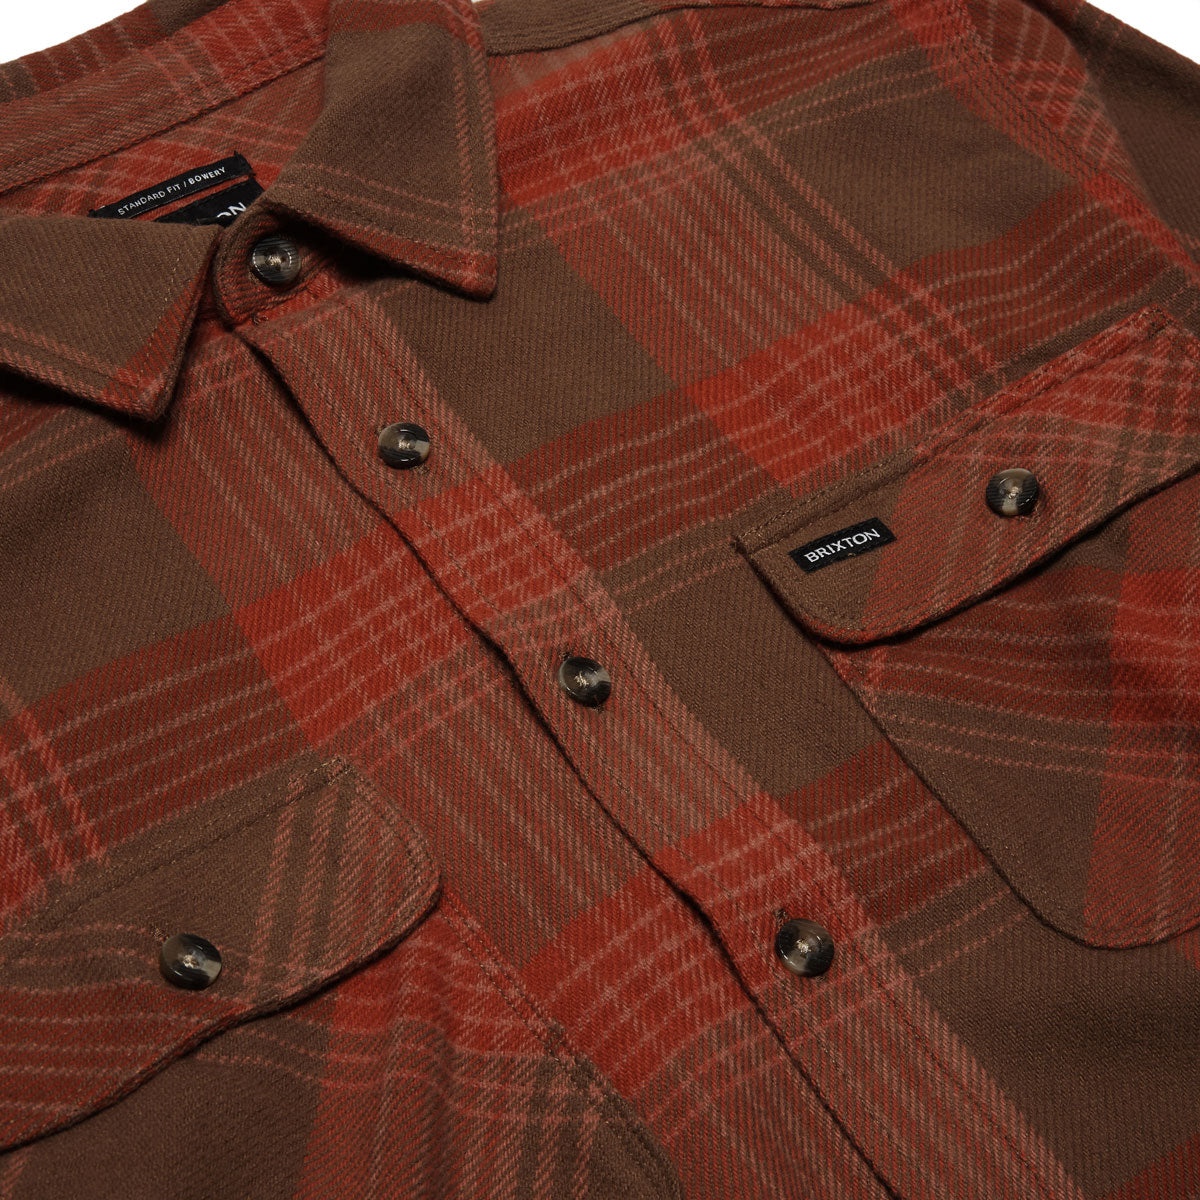 Brixton Bowery Flannel long Sleeve Shirt - Barn Red/Bison image 2